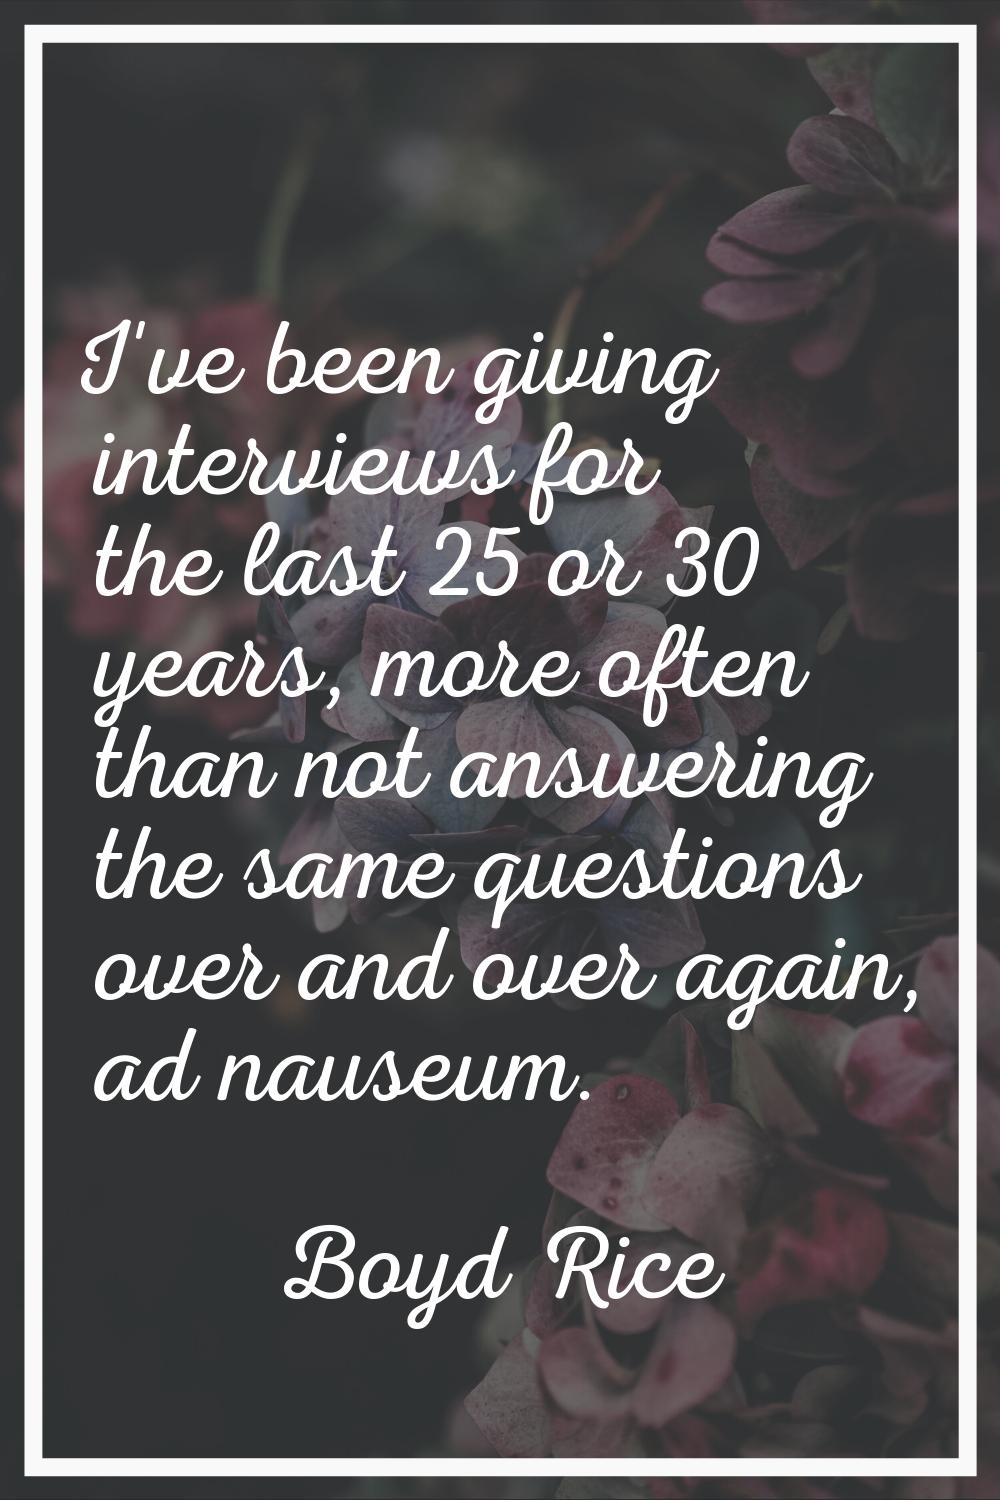 I've been giving interviews for the last 25 or 30 years, more often than not answering the same que